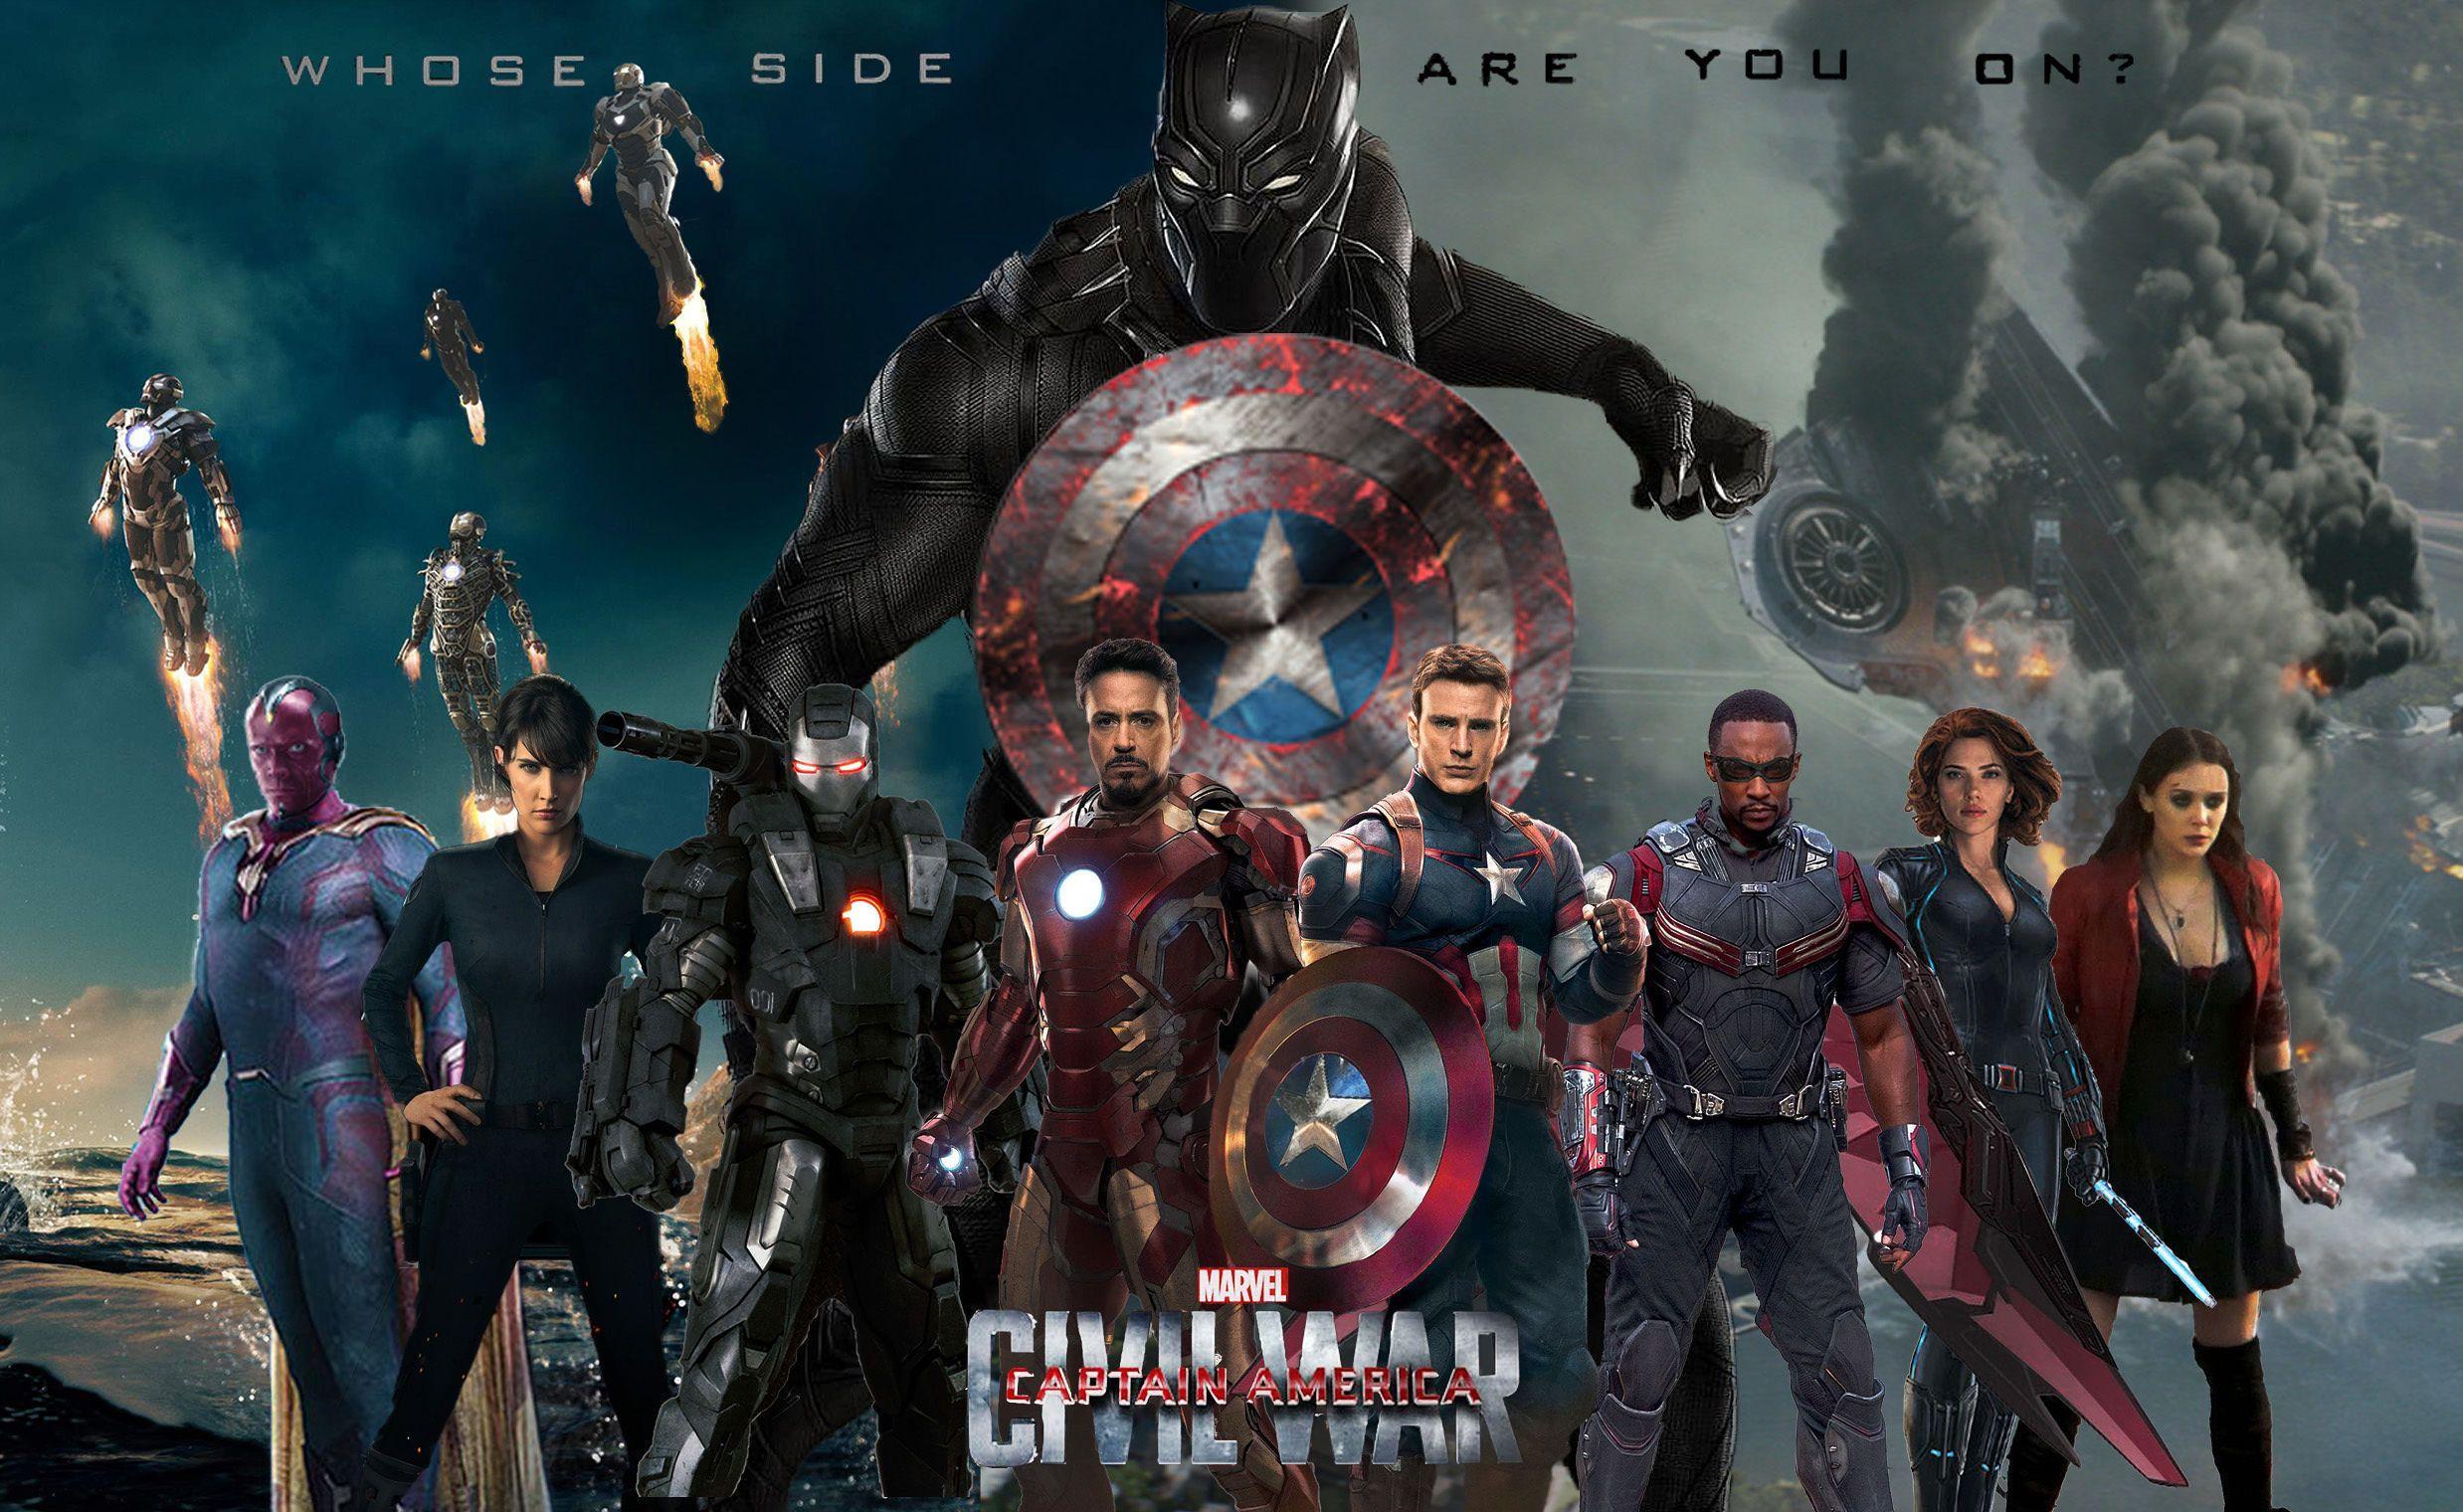 Captain America Civil War wallpapers High Resolution and Quality